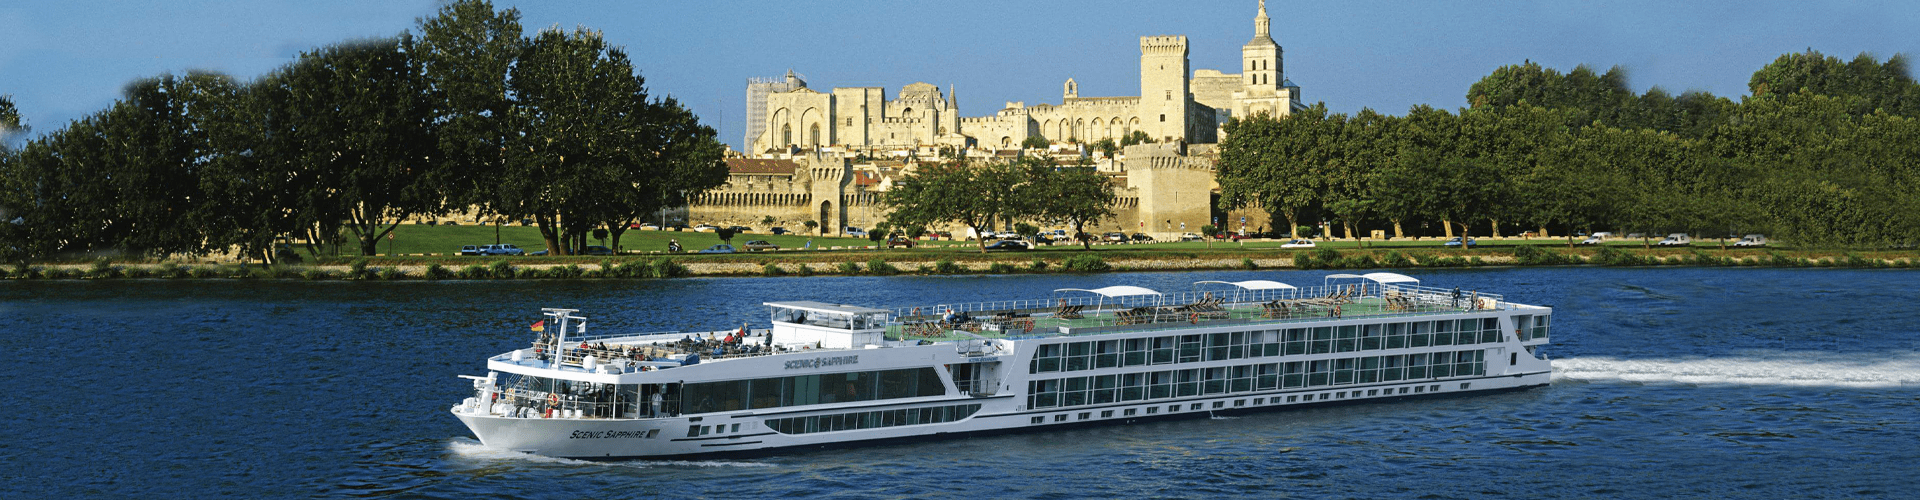 who owns scenic river cruises